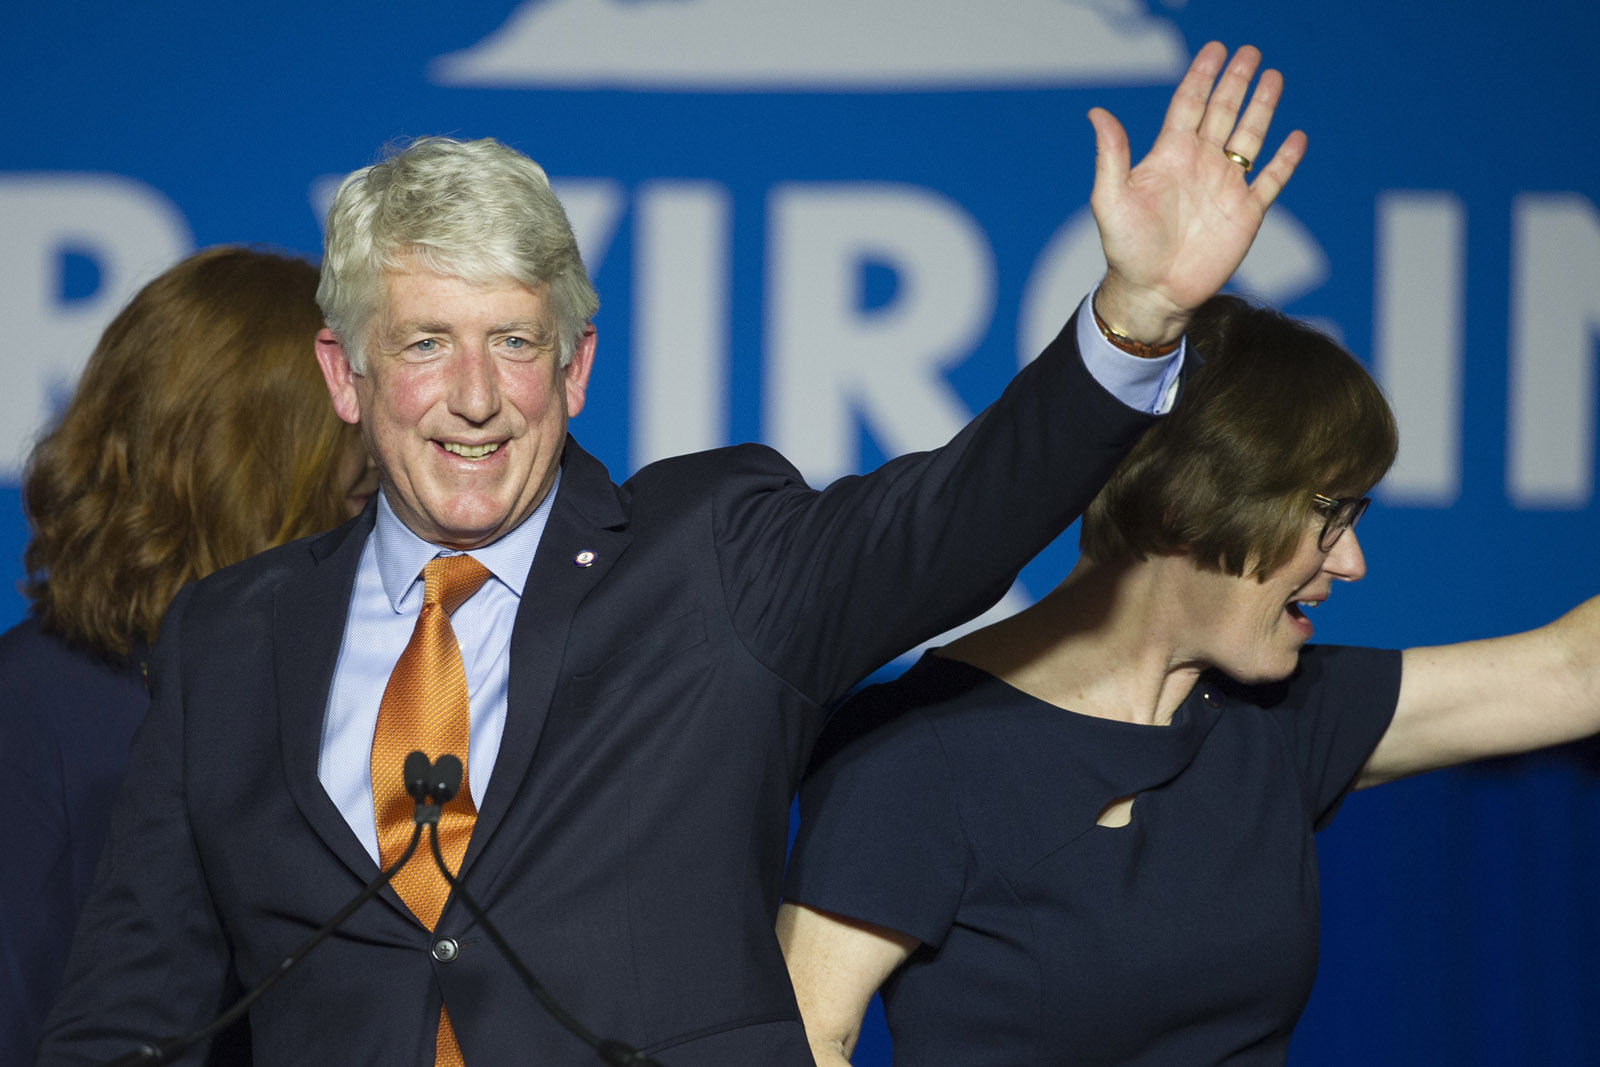 Democratic Attorney General Mark Herring and his wife Laura, right, celebrate his re-election with supporters at the Northam For Governor election night party at George Mason University in Fairfax, Va., Tuesday, Nov. 7, 2017. Herring won a second term as Virginia's attorney general Tuesday, beating back a challenge from Republican John Adams. (AP Photo/Cliff Owen)